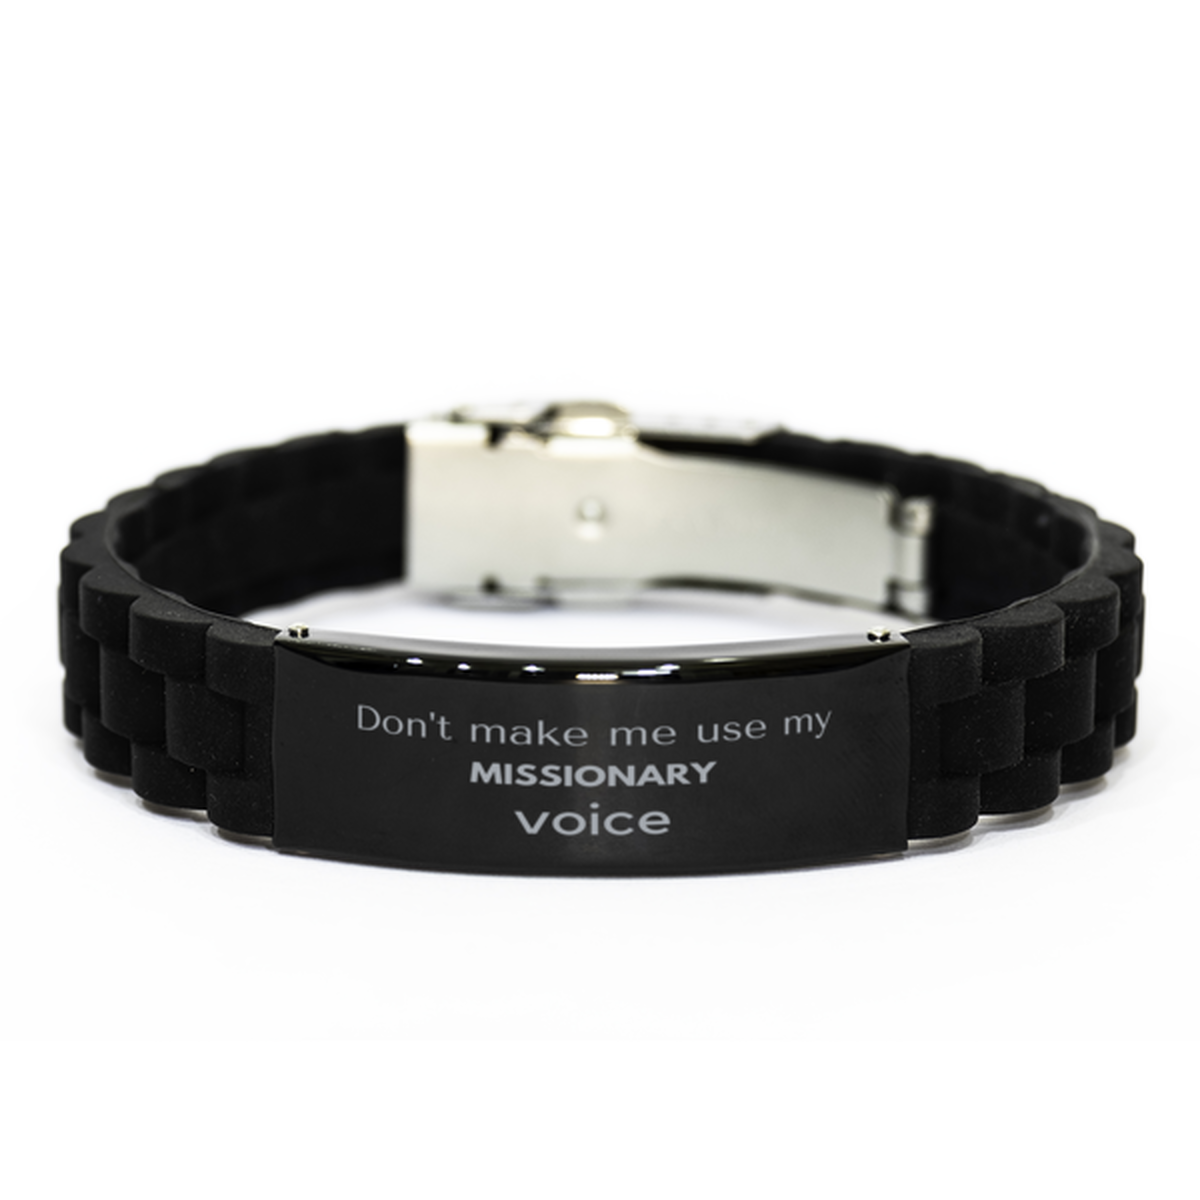 Don't make me use my Missionary voice, Sarcasm Missionary Gifts, Christmas Missionary Black Glidelock Clasp Bracelet Birthday Unique Gifts For Missionary Coworkers, Men, Women, Colleague, Friends